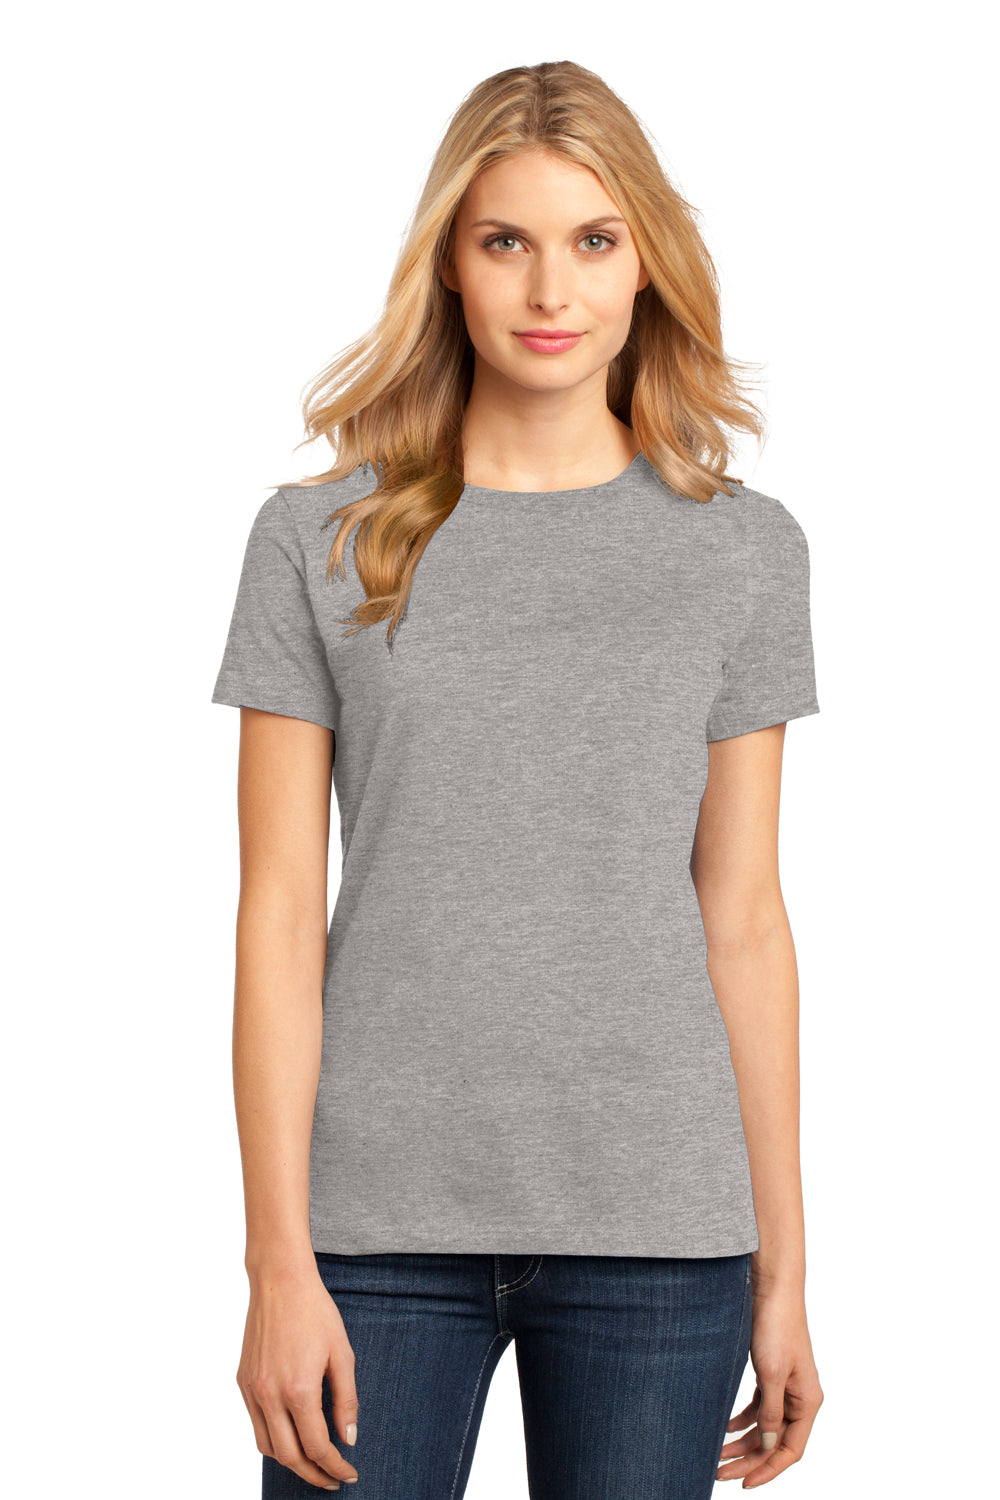 District DM104L Womens Perfect Weight Short Sleeve Crewneck T-Shirt Heather Steel Grey Front